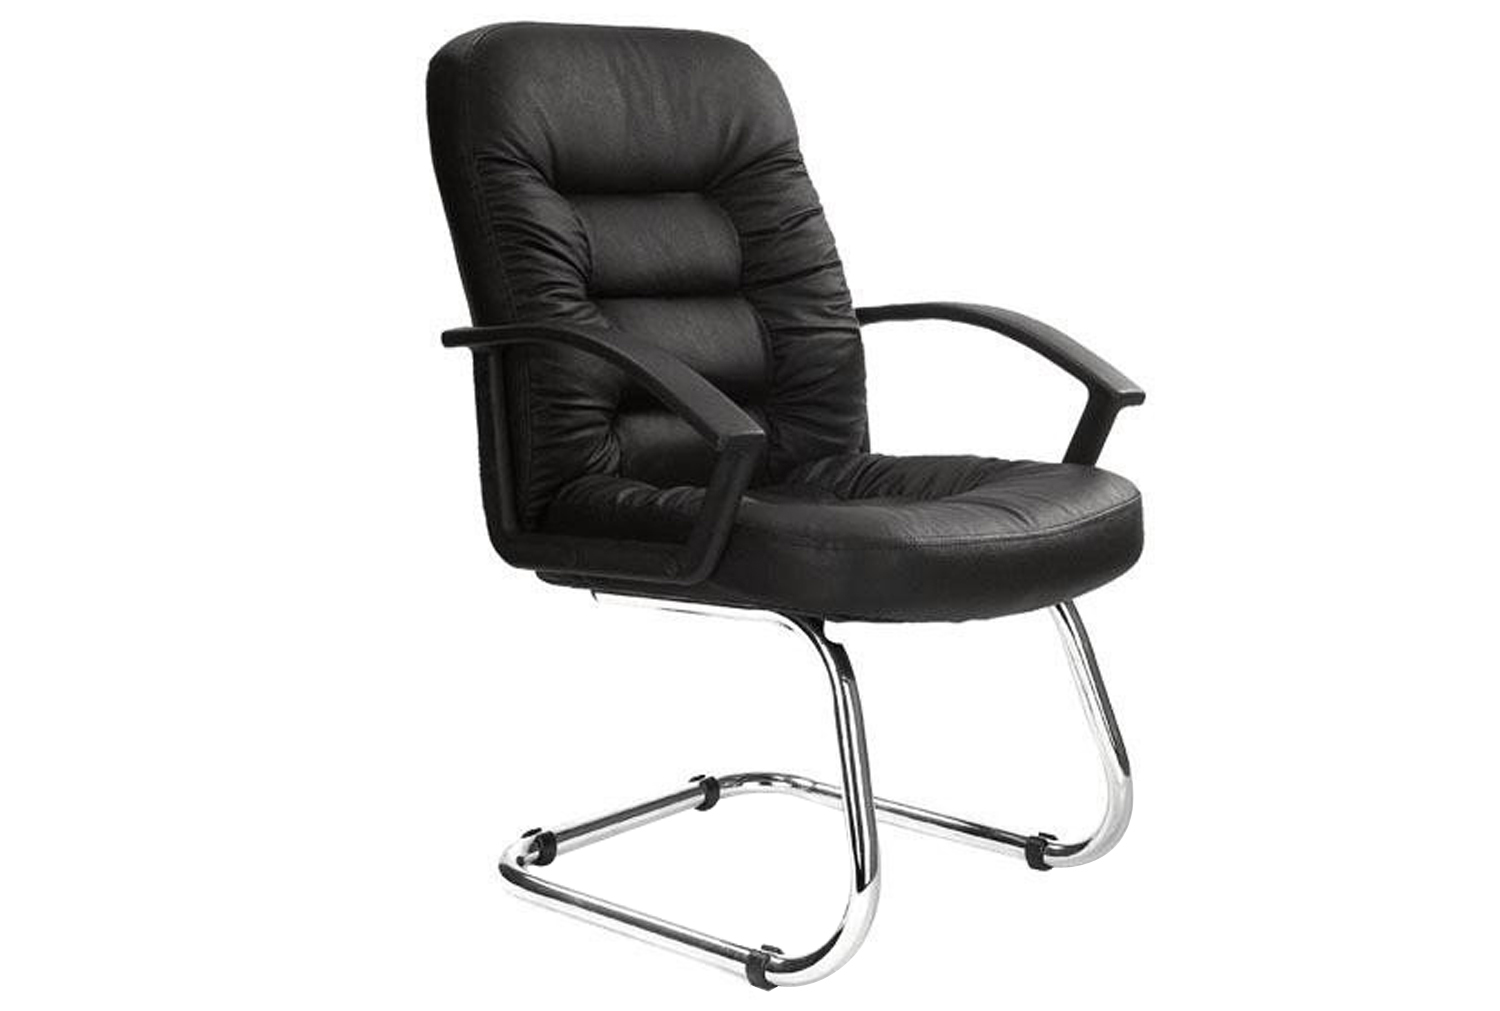 Bartlett Leather Faced Visitor Office Chair, Black, Fully Installed